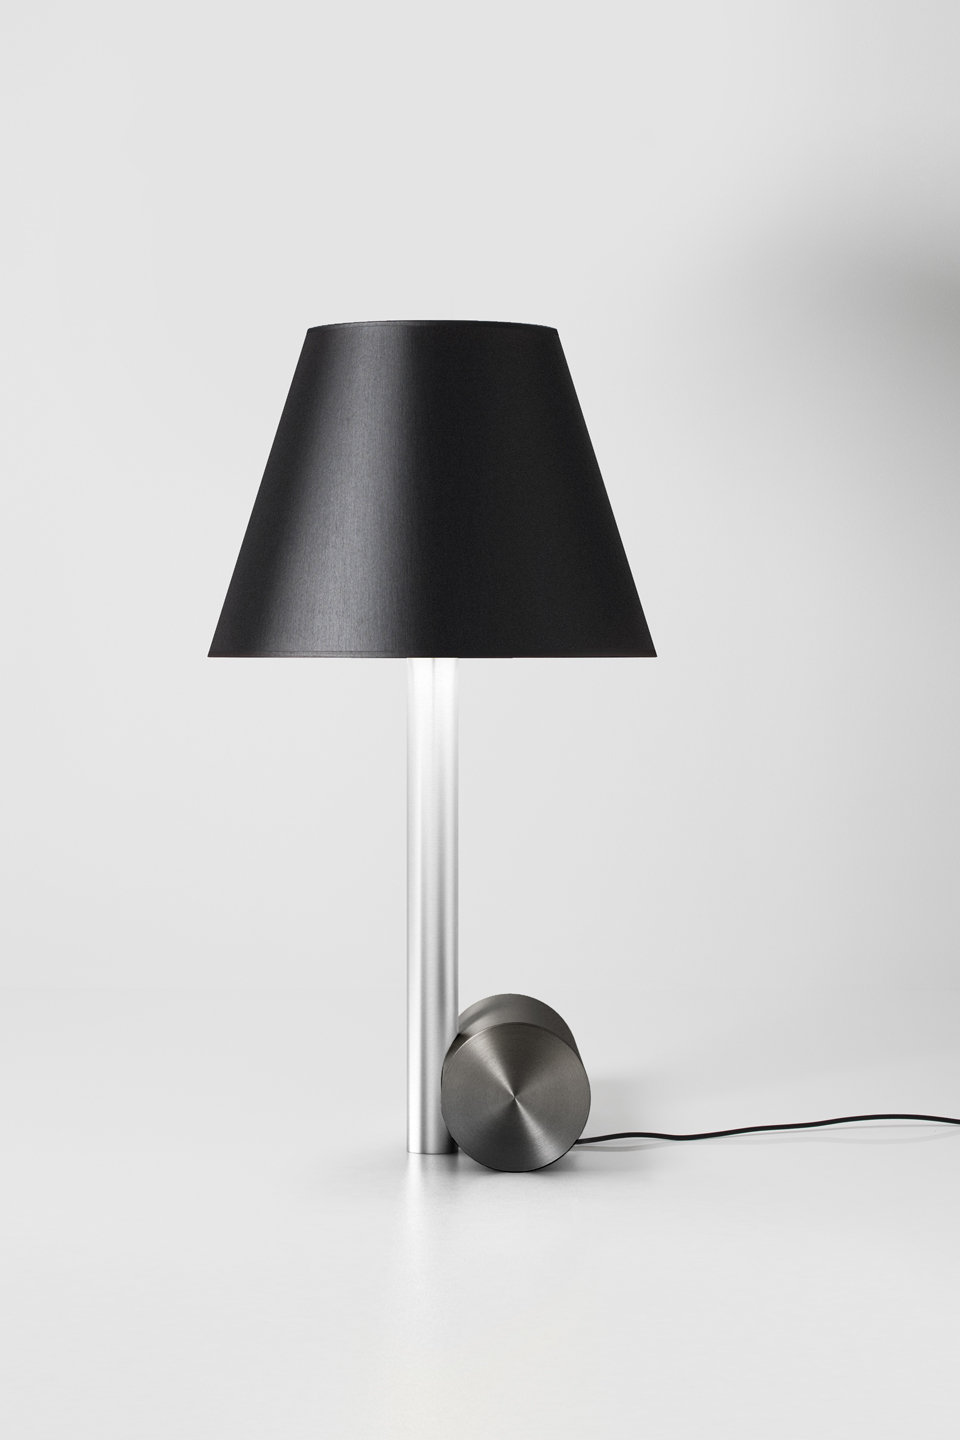 Small Satin Nickel Table Lamp With, Black Nickel Table Lamps